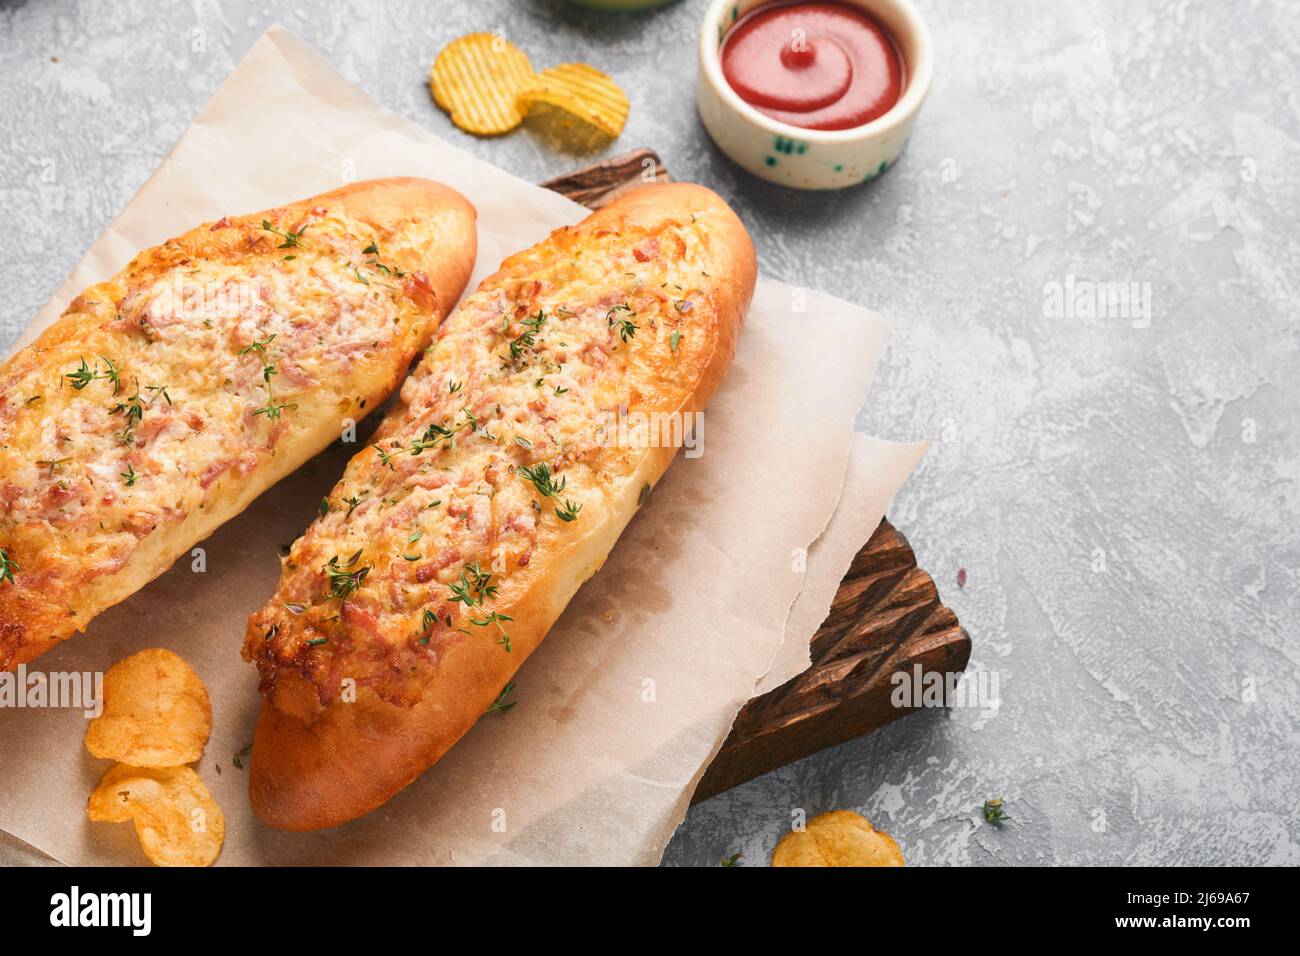 Baguette boats. Hot baked sandwich on baguette bread with ham, bacon, vegetables and cheese on parchment and wooden stand on gray concrete background. Stock Photo